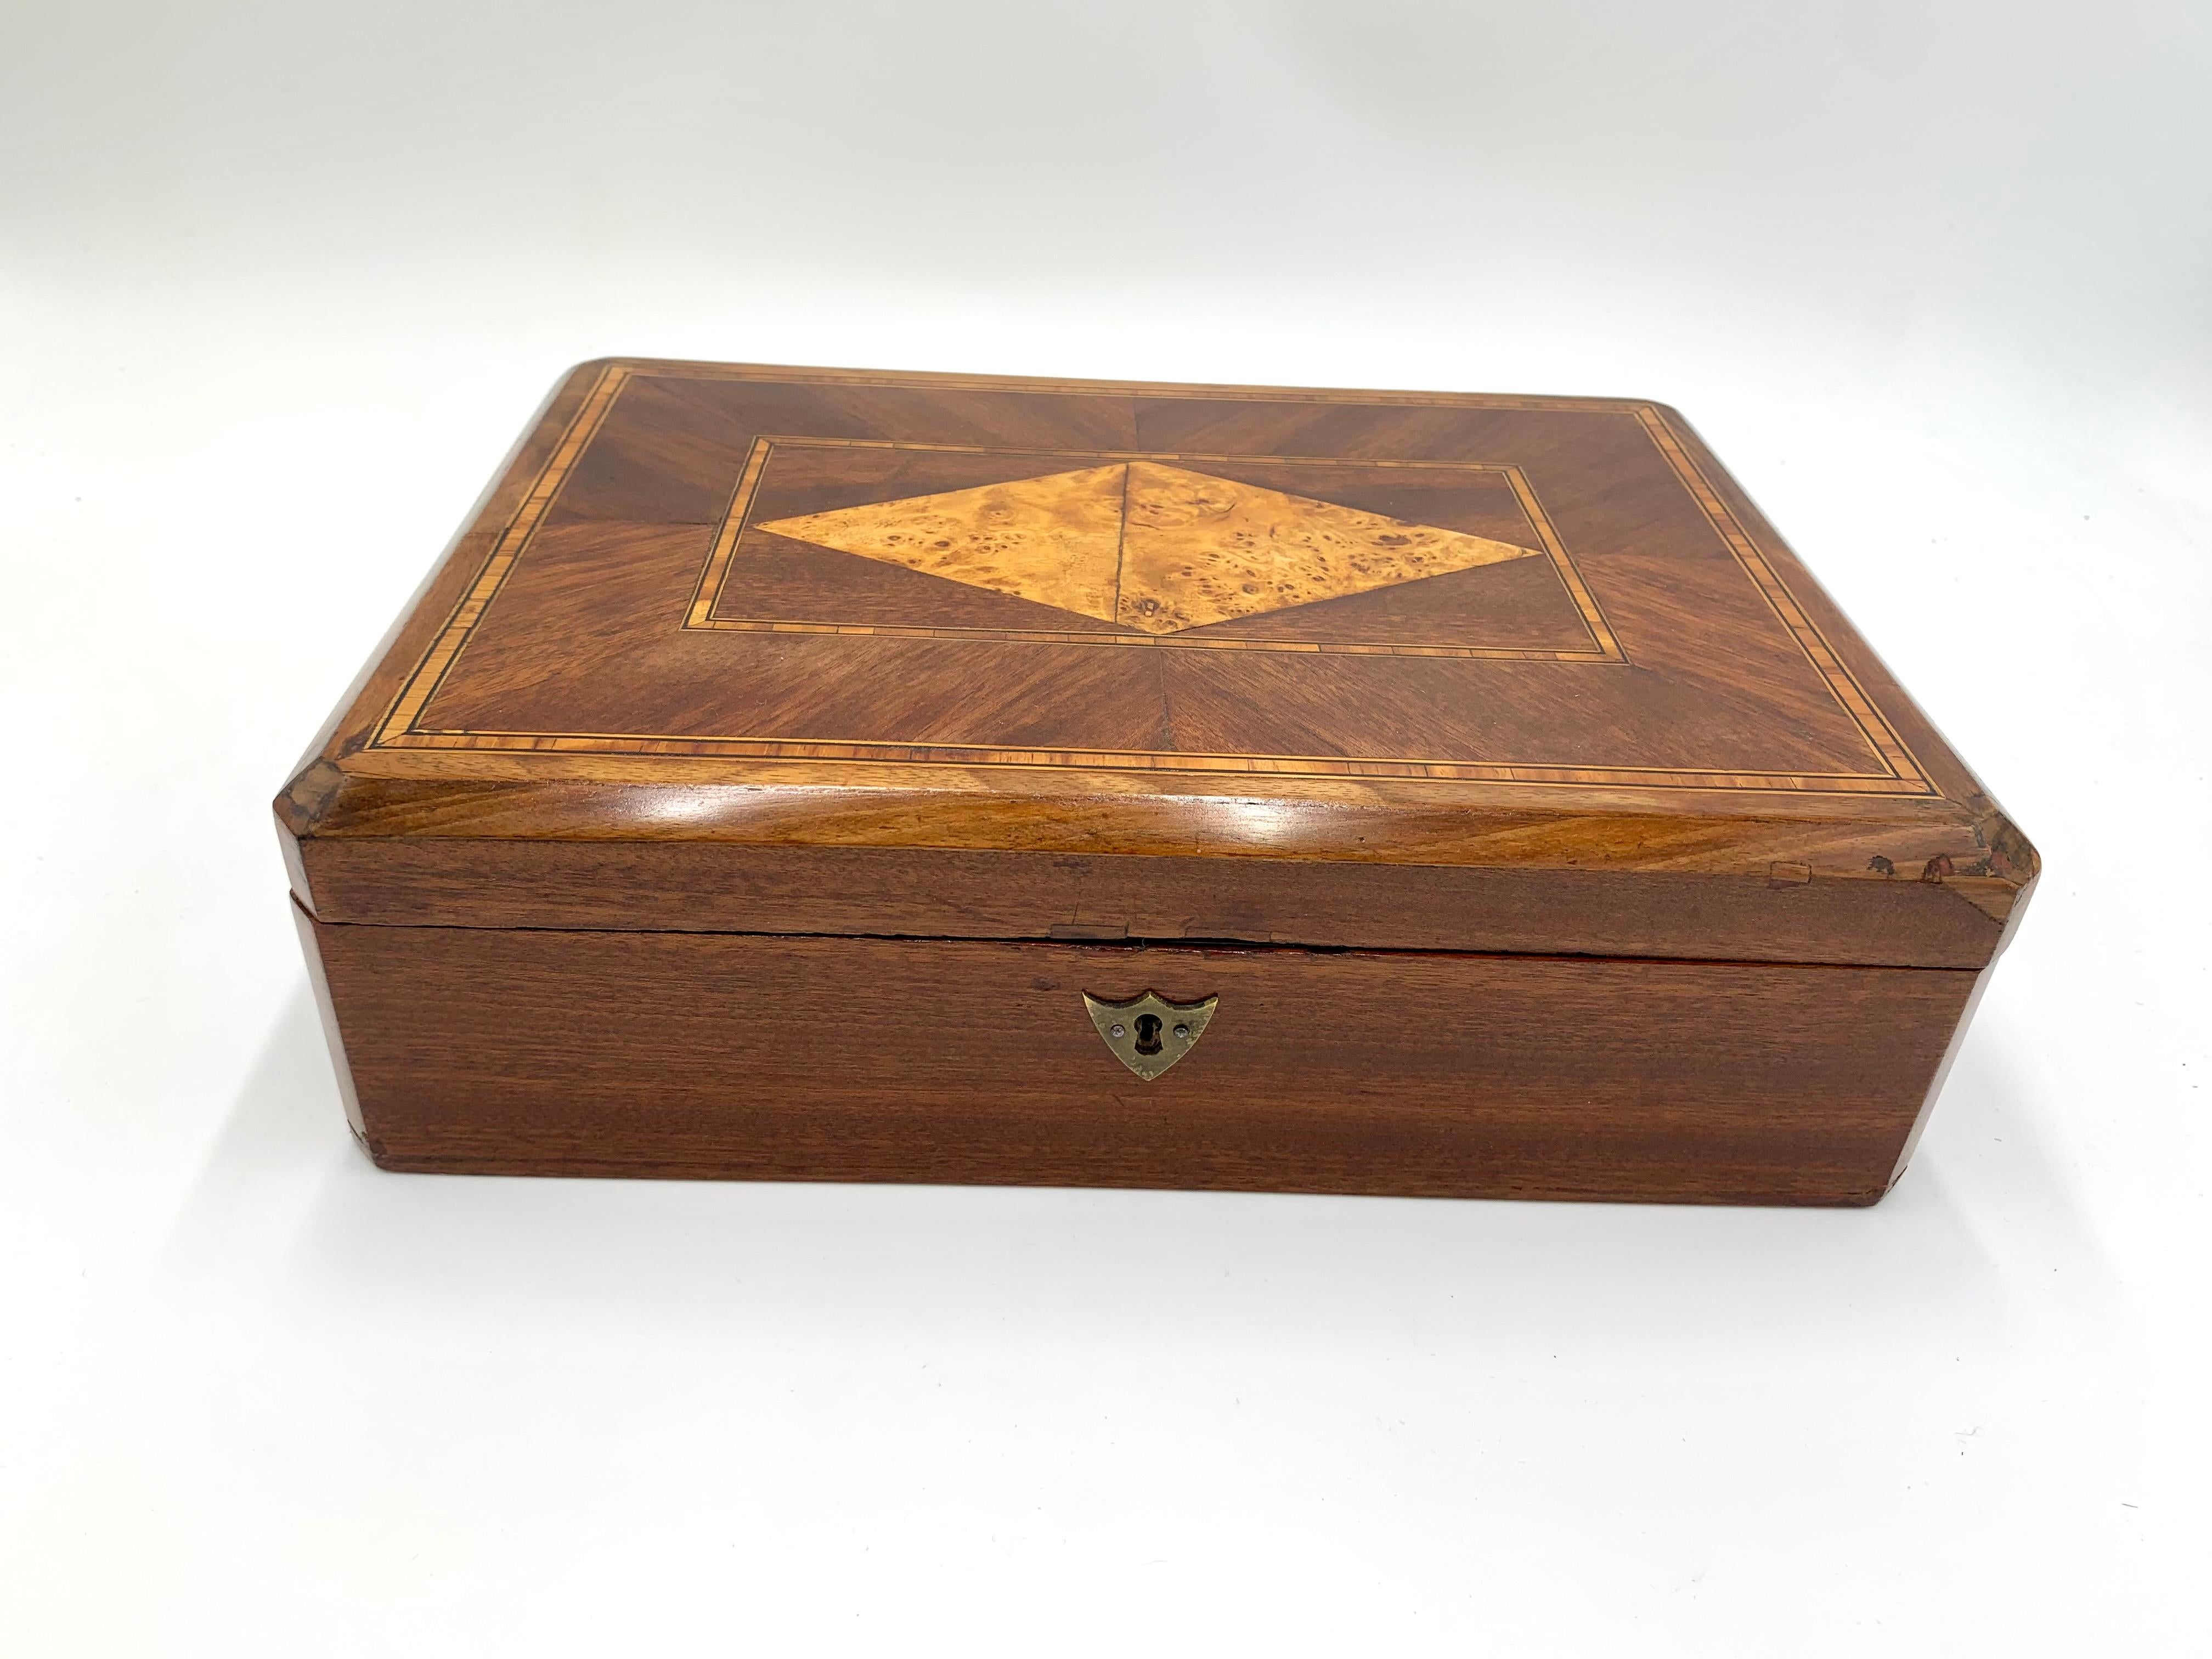 Wooden box / box for threads or jewelry.

Very good condition.

height 9cm width 30cm depth 22cm.